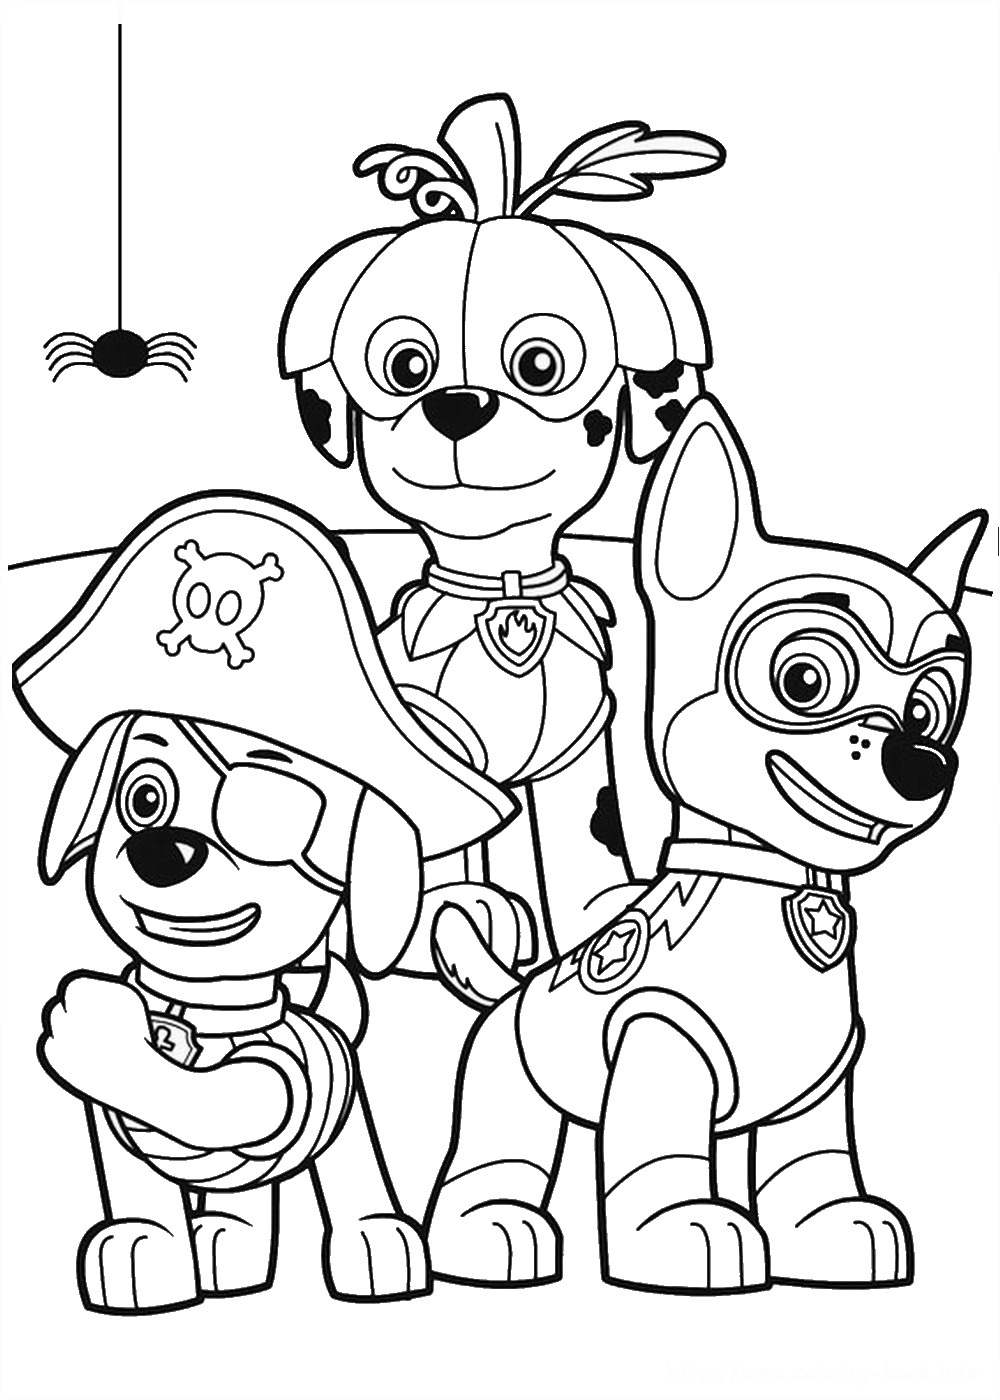 Download 25+ Excellent Picture of Chase Paw Patrol Coloring Page - entitlementtrap.com